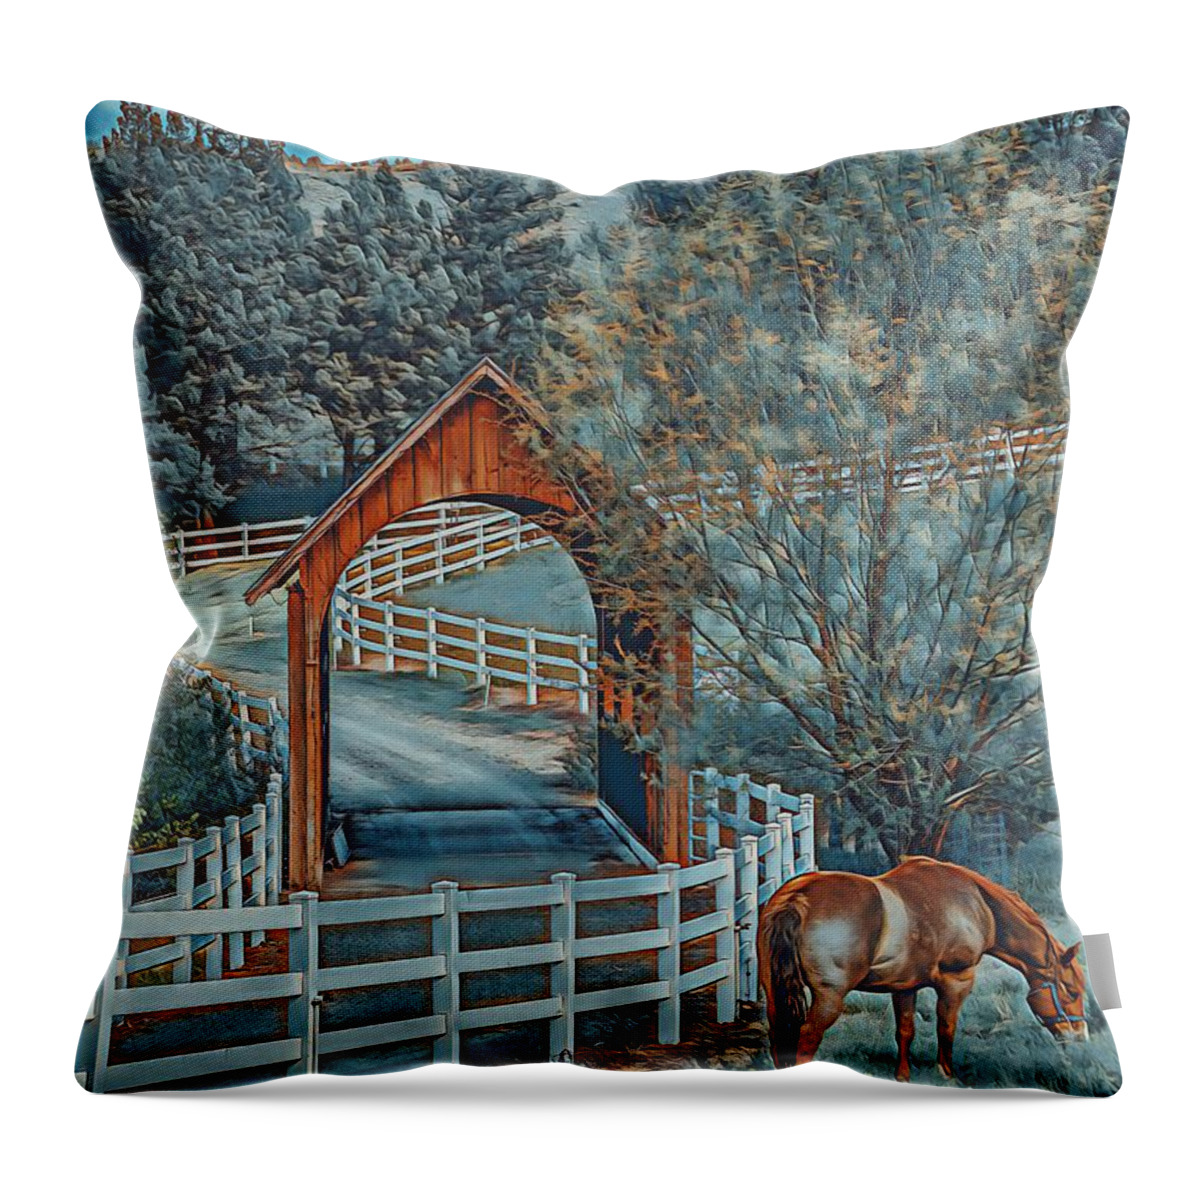 Horse Throw Pillow featuring the digital art Country Scene by Jerry Cahill